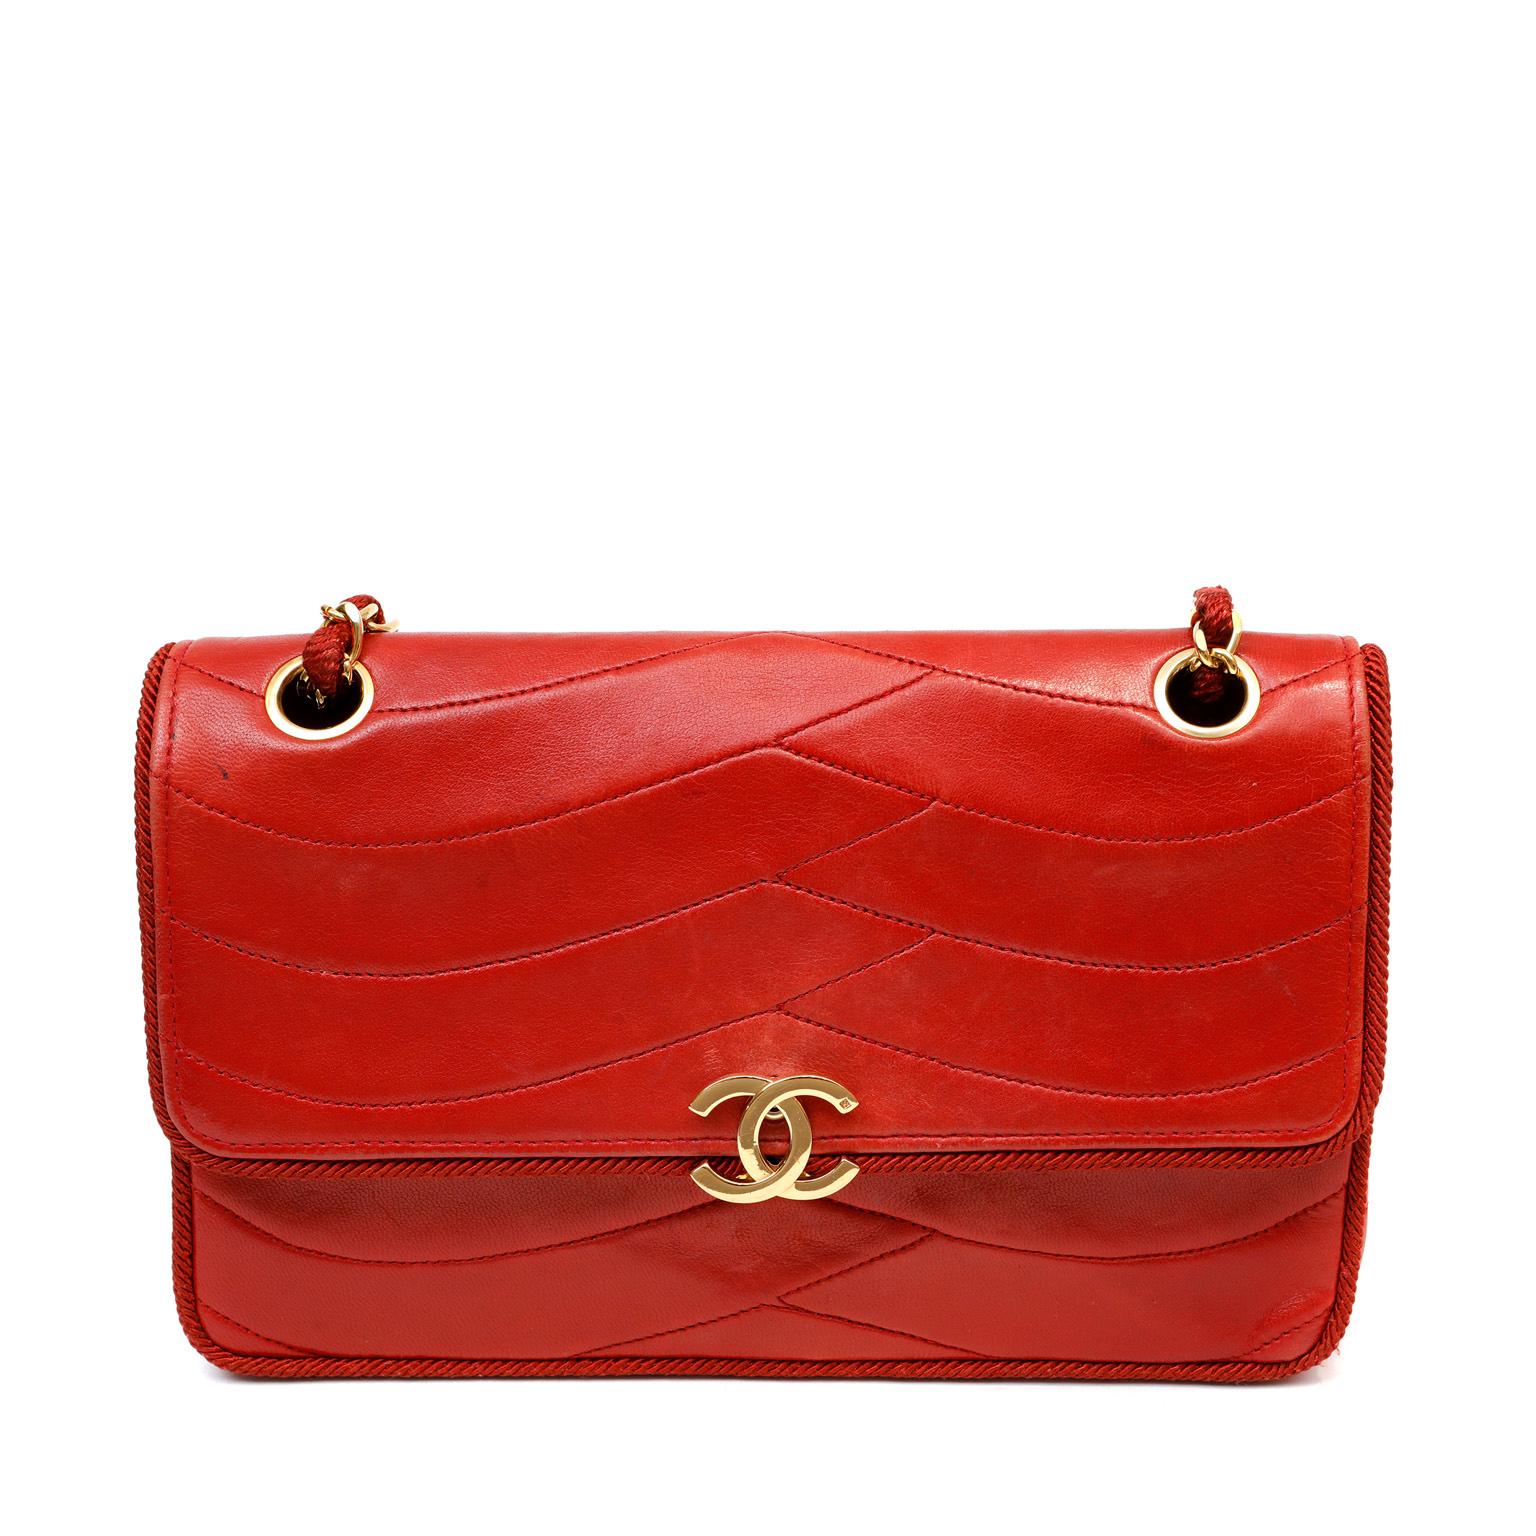 Chanel Vintage Red Leather Scallop Quilted Flap Bag  For Sale 1